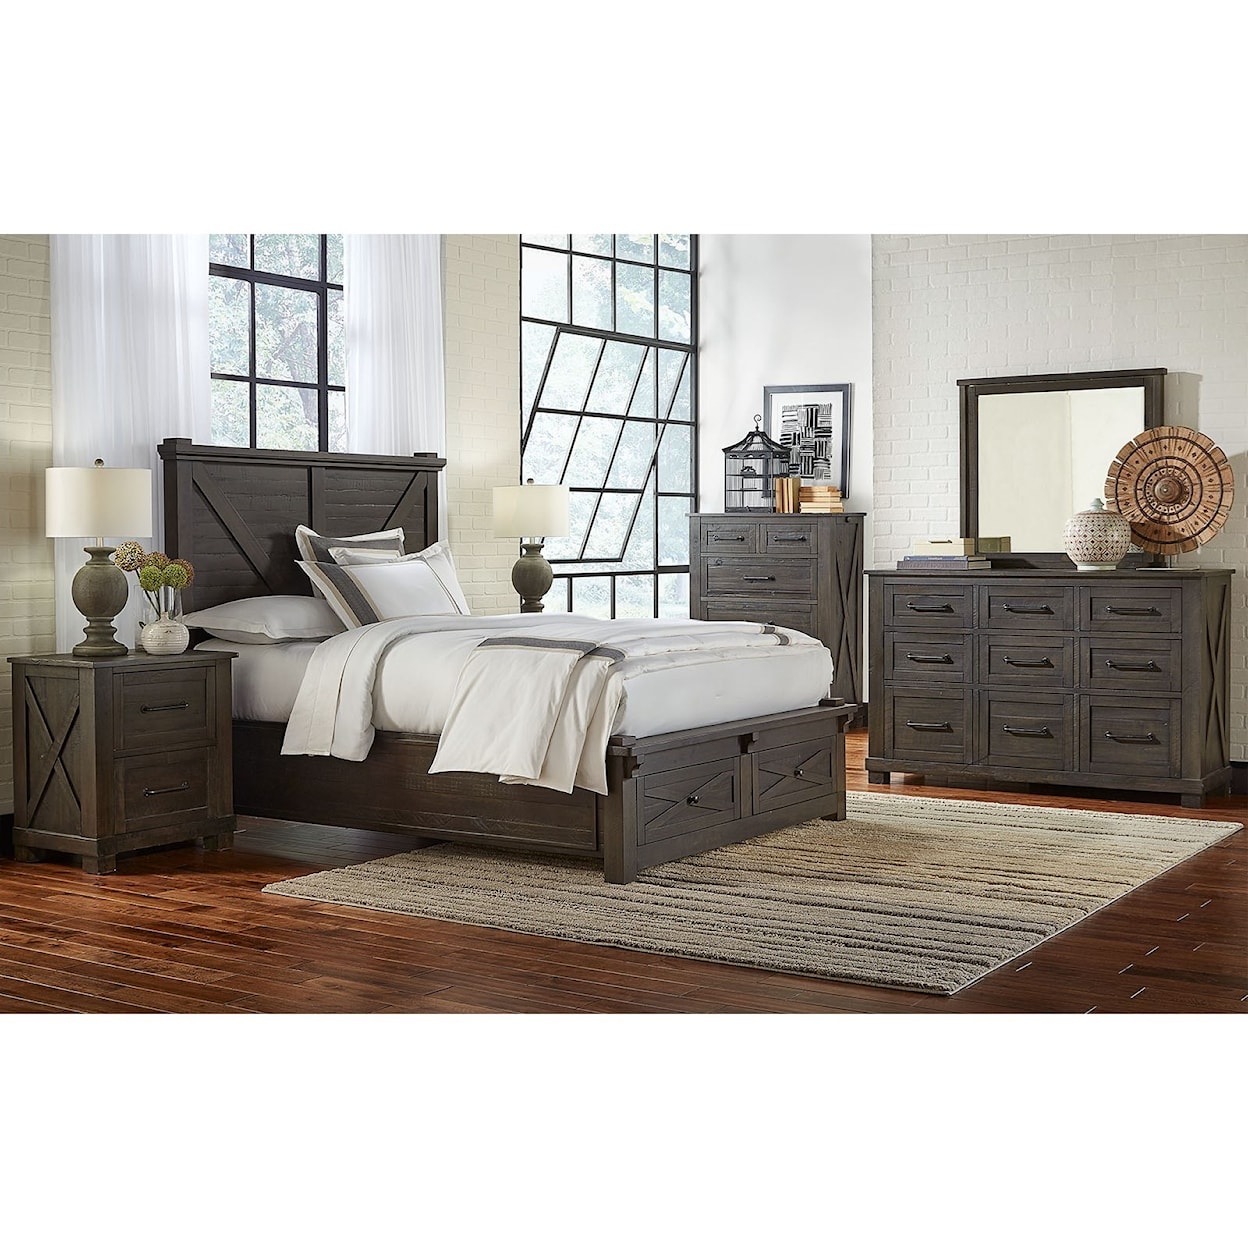 AAmerica Sun Valley Queen Bed with Footboard Bench